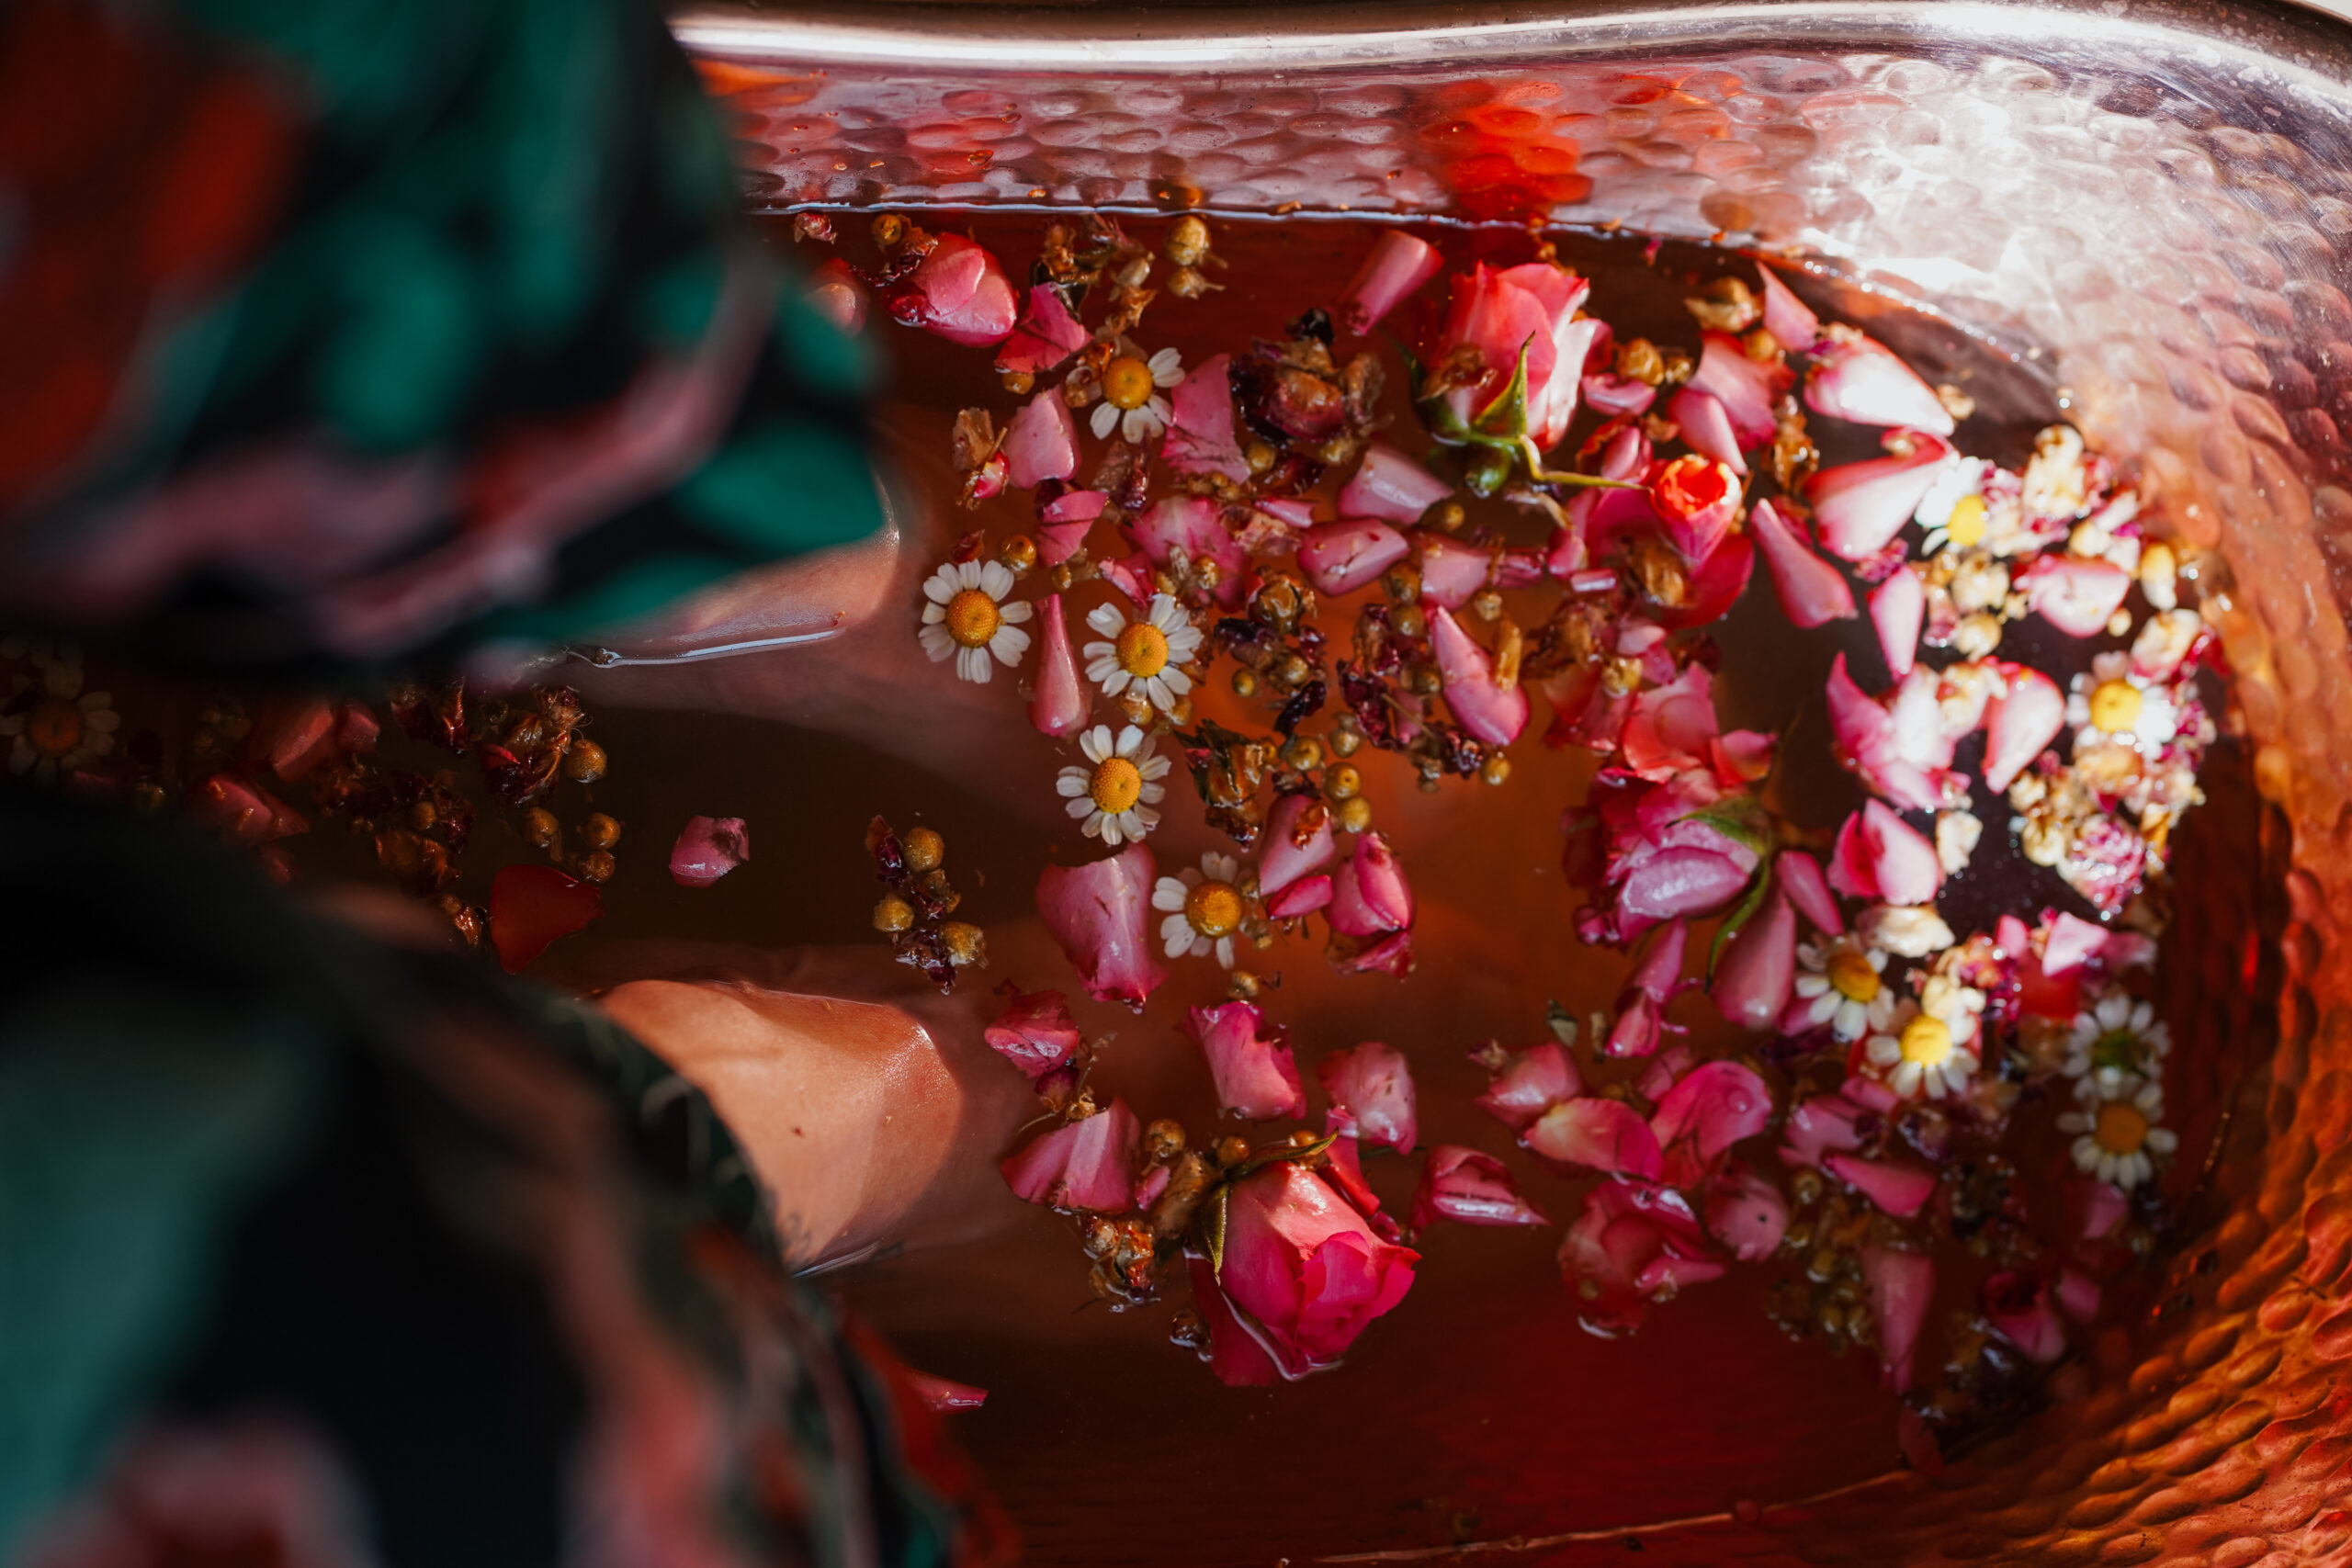 woman taking a foot bath soak with roses and chamomile